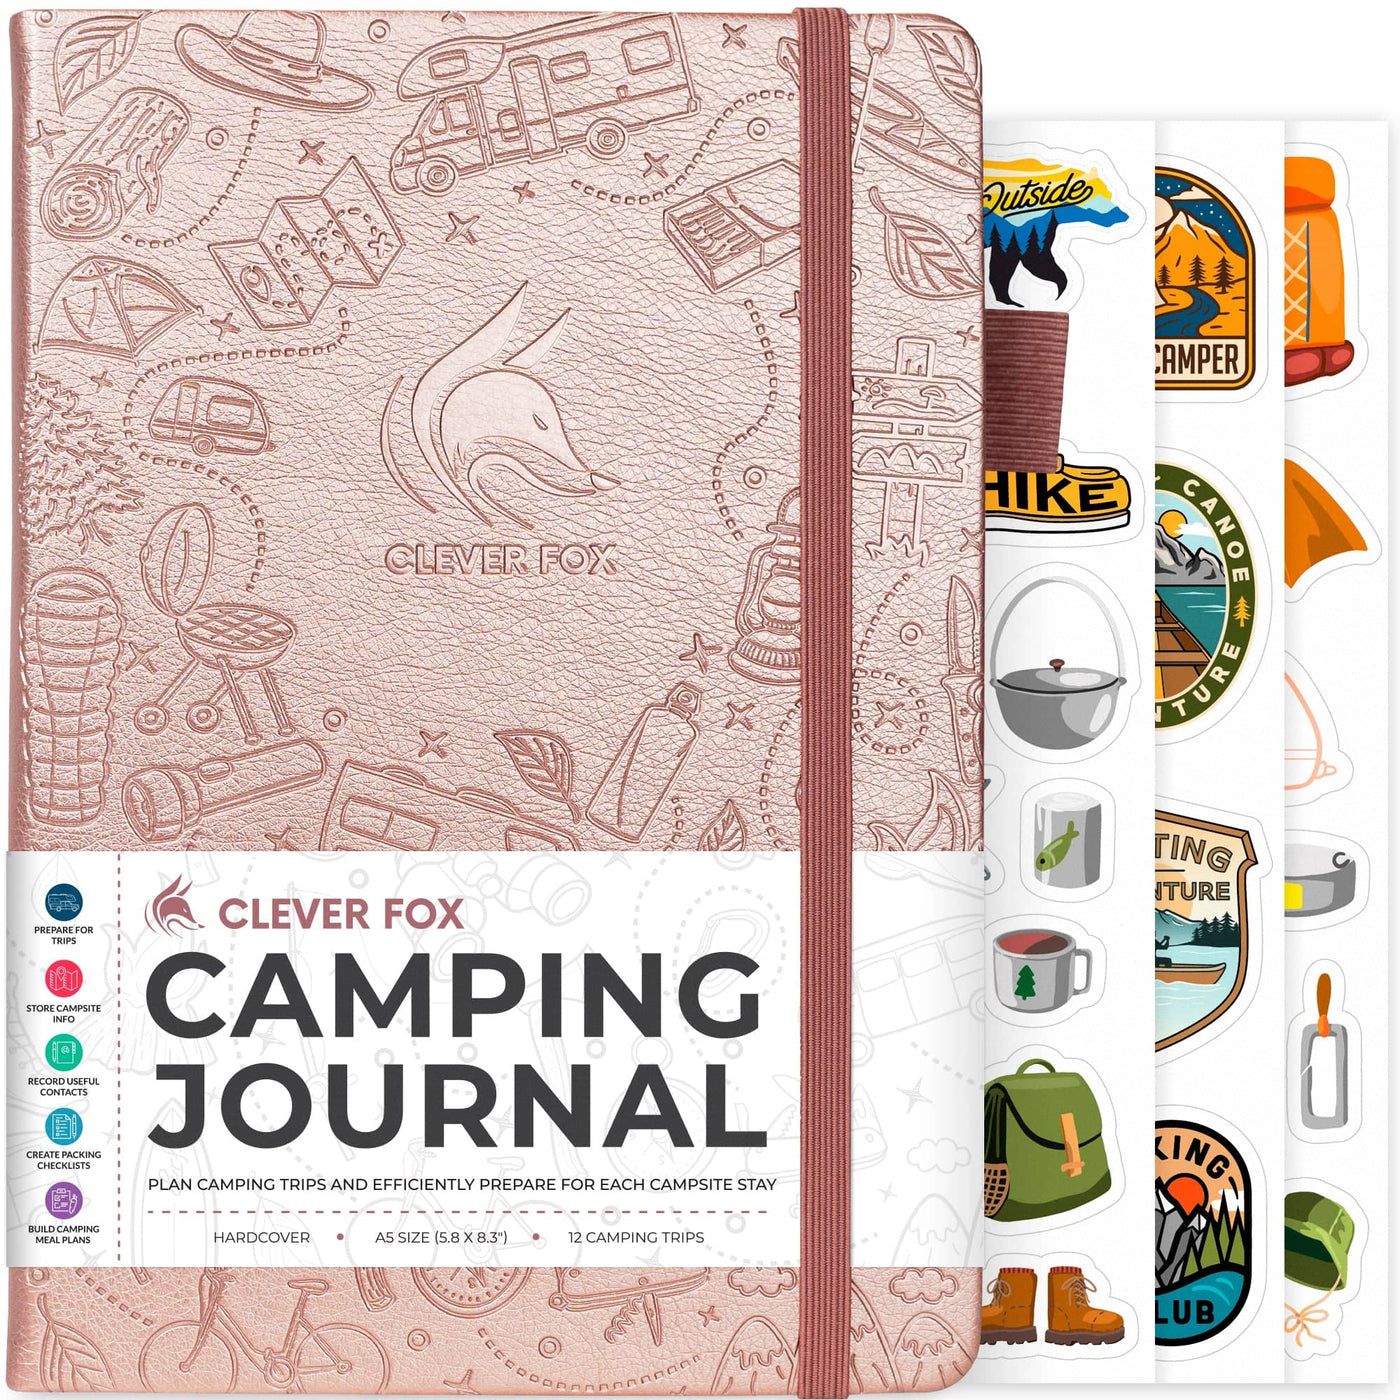 Camping Journal : Ultimate Camping Journal And Travel Journal For All.  Great Travel Journal For Couples And Adventure Journal. Get This Camping  Book And Fill This Wanderlust Book With Family Adventure Book